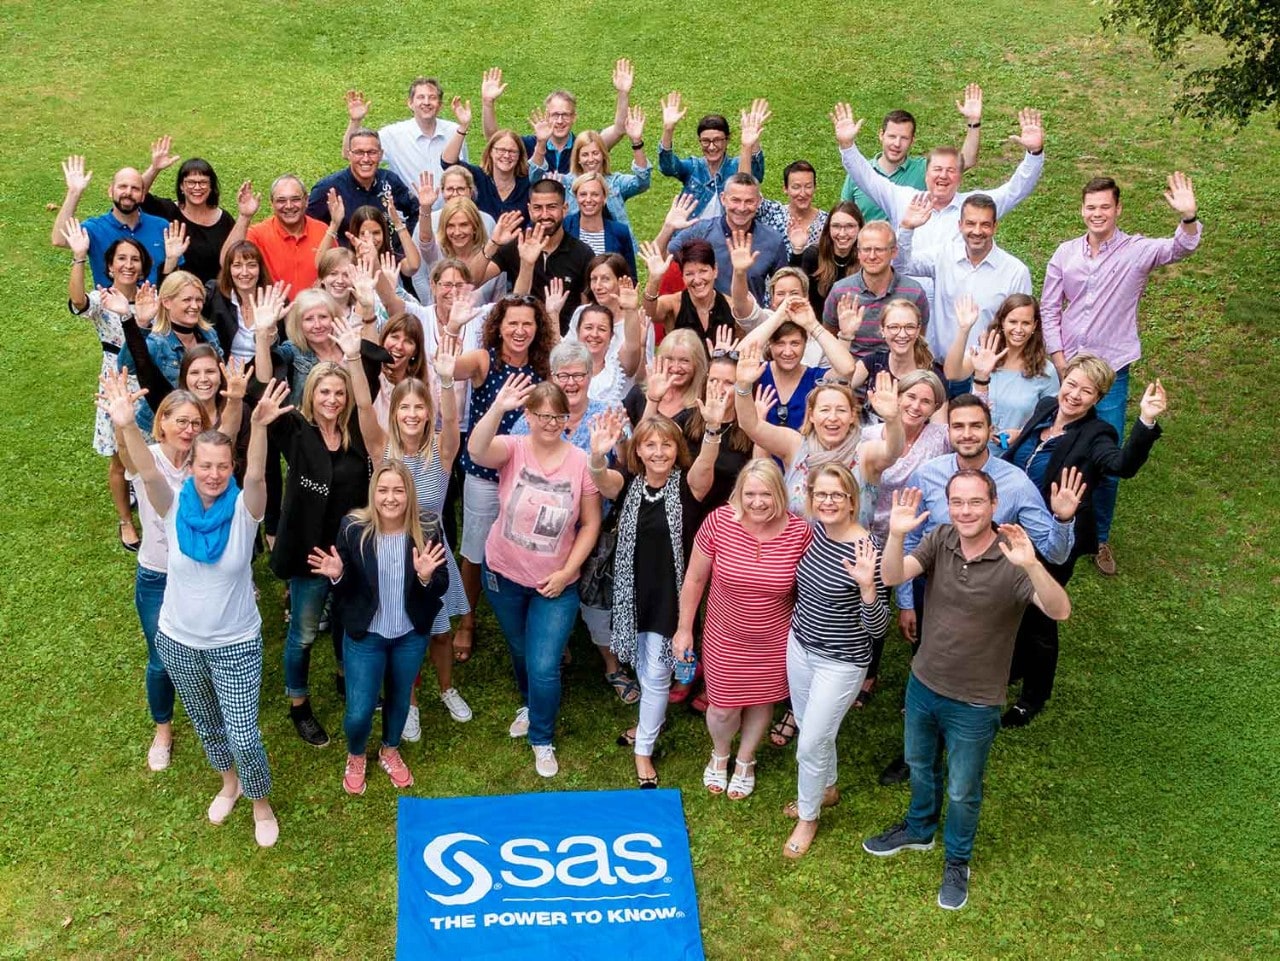 Group of SAS employees on campus lawn smiling and waving 